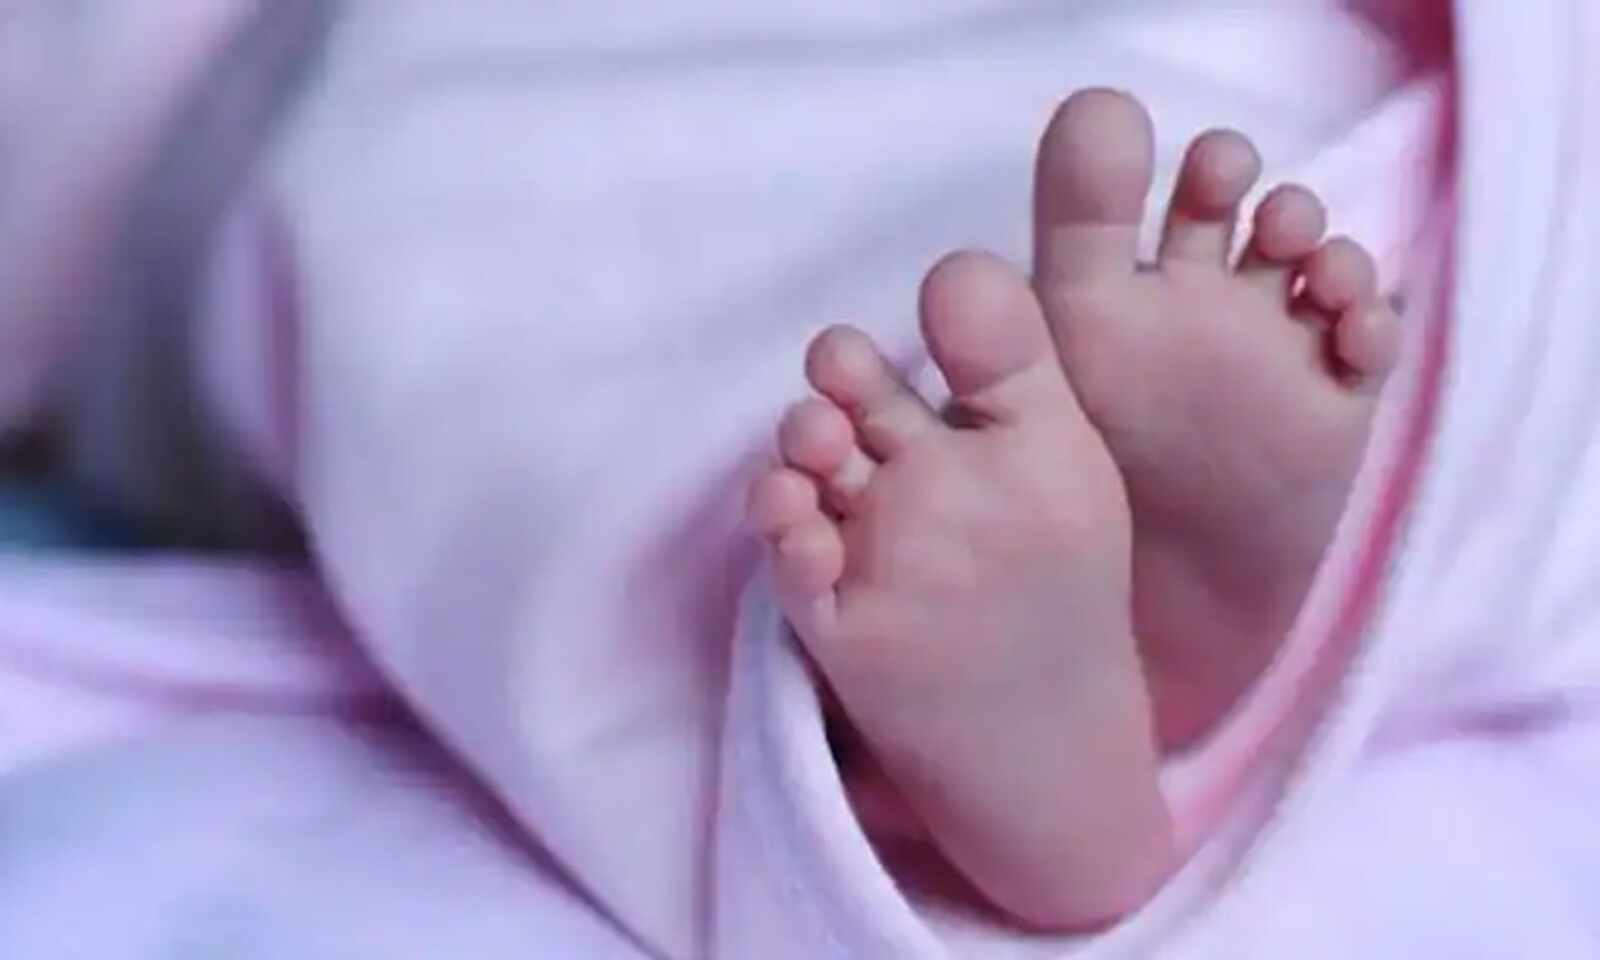 5-day-old baby abducted from hospital